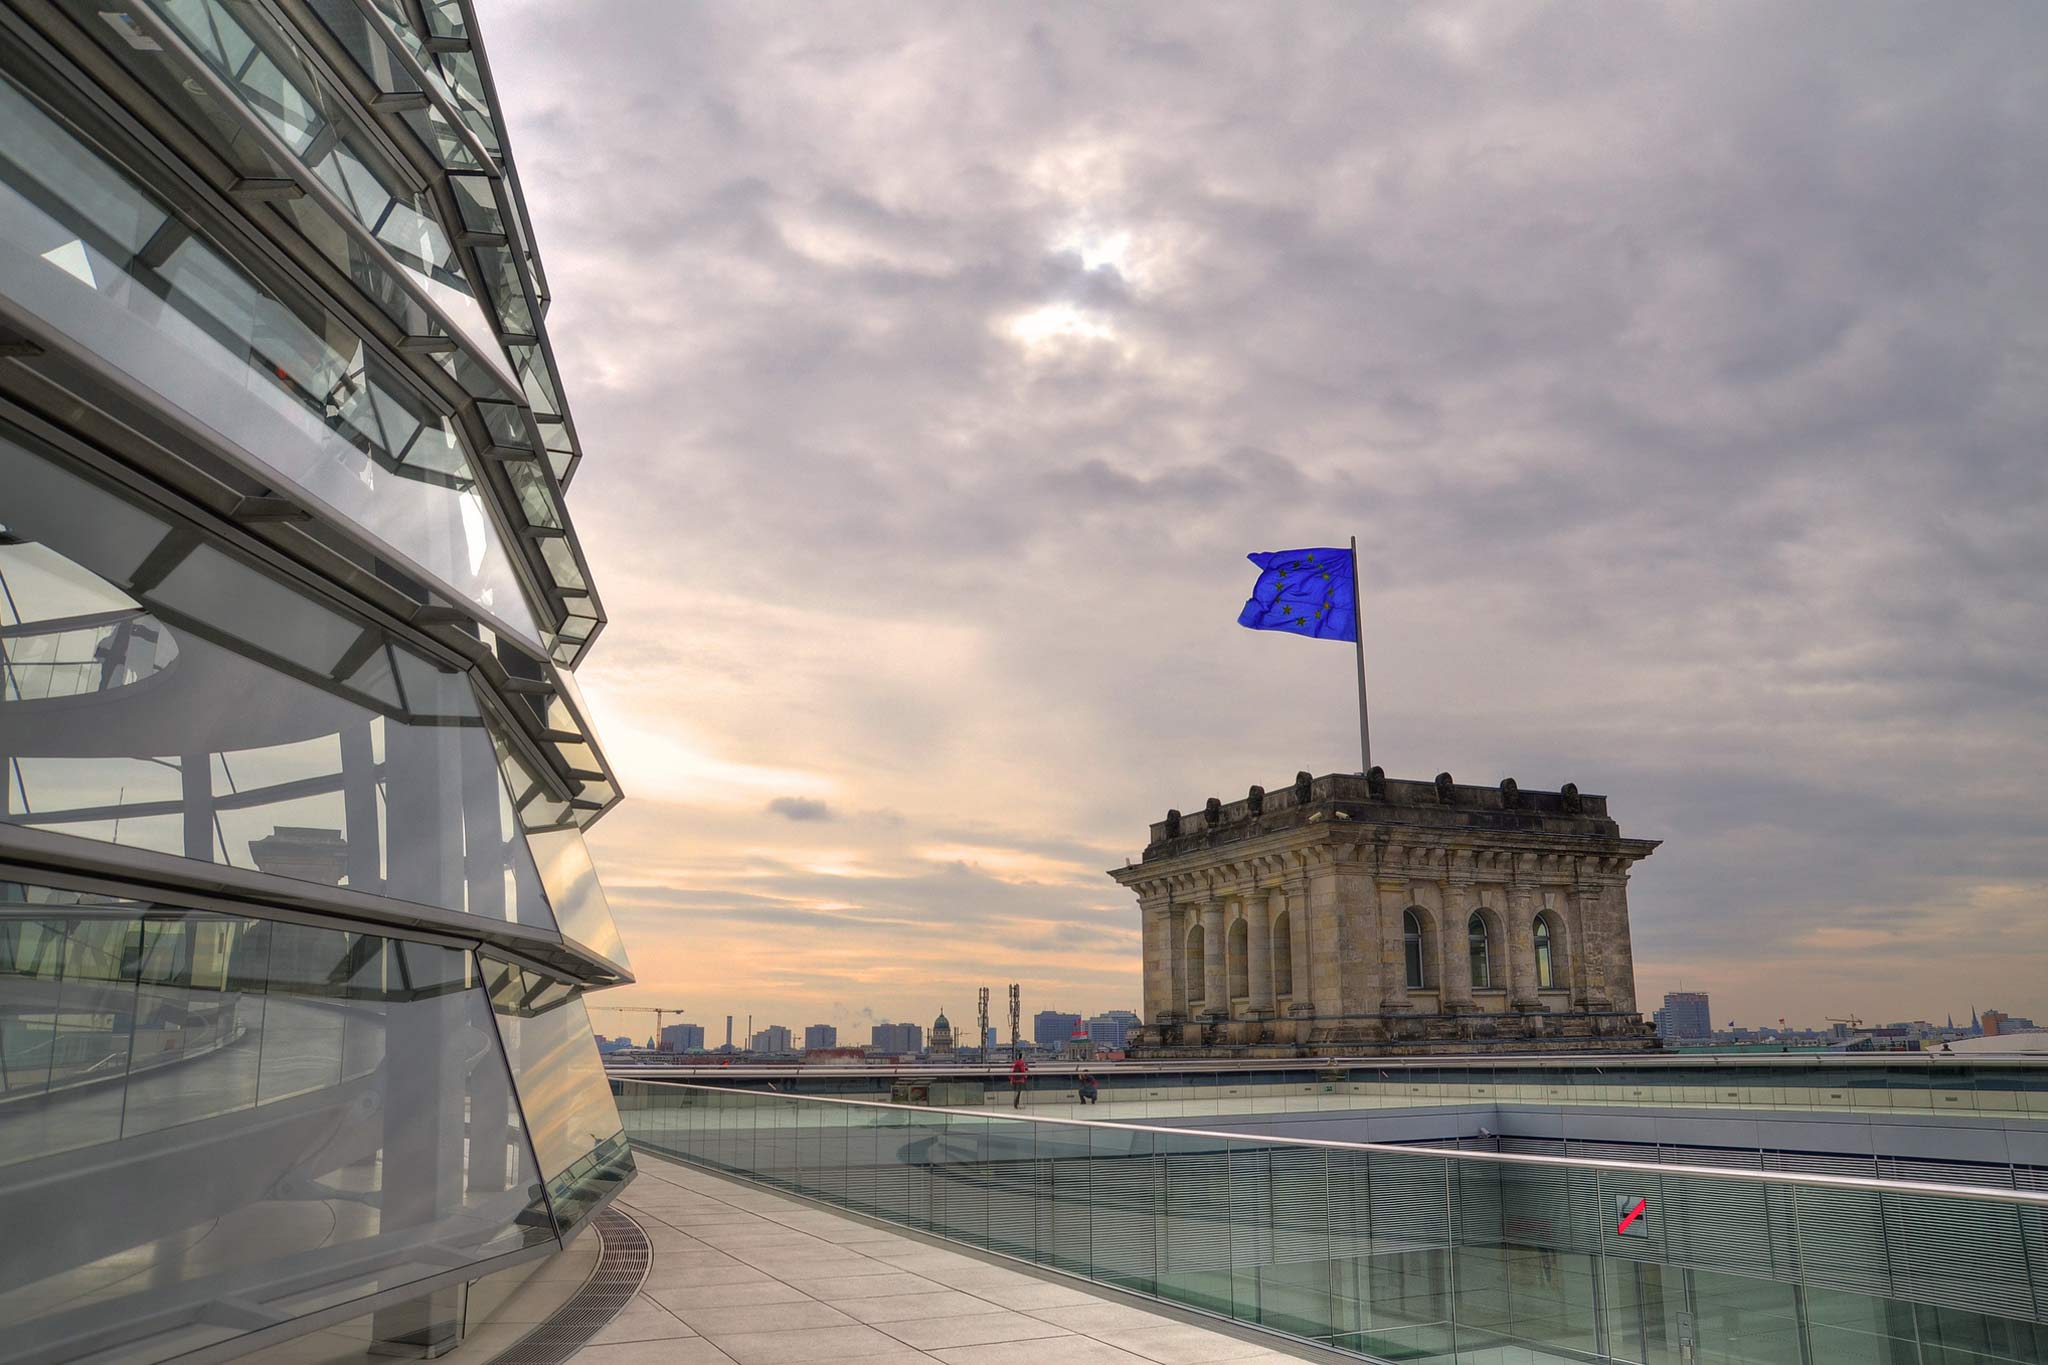 Reichstag Building, Berlin, Germany. Photo: amira_a, PxHere